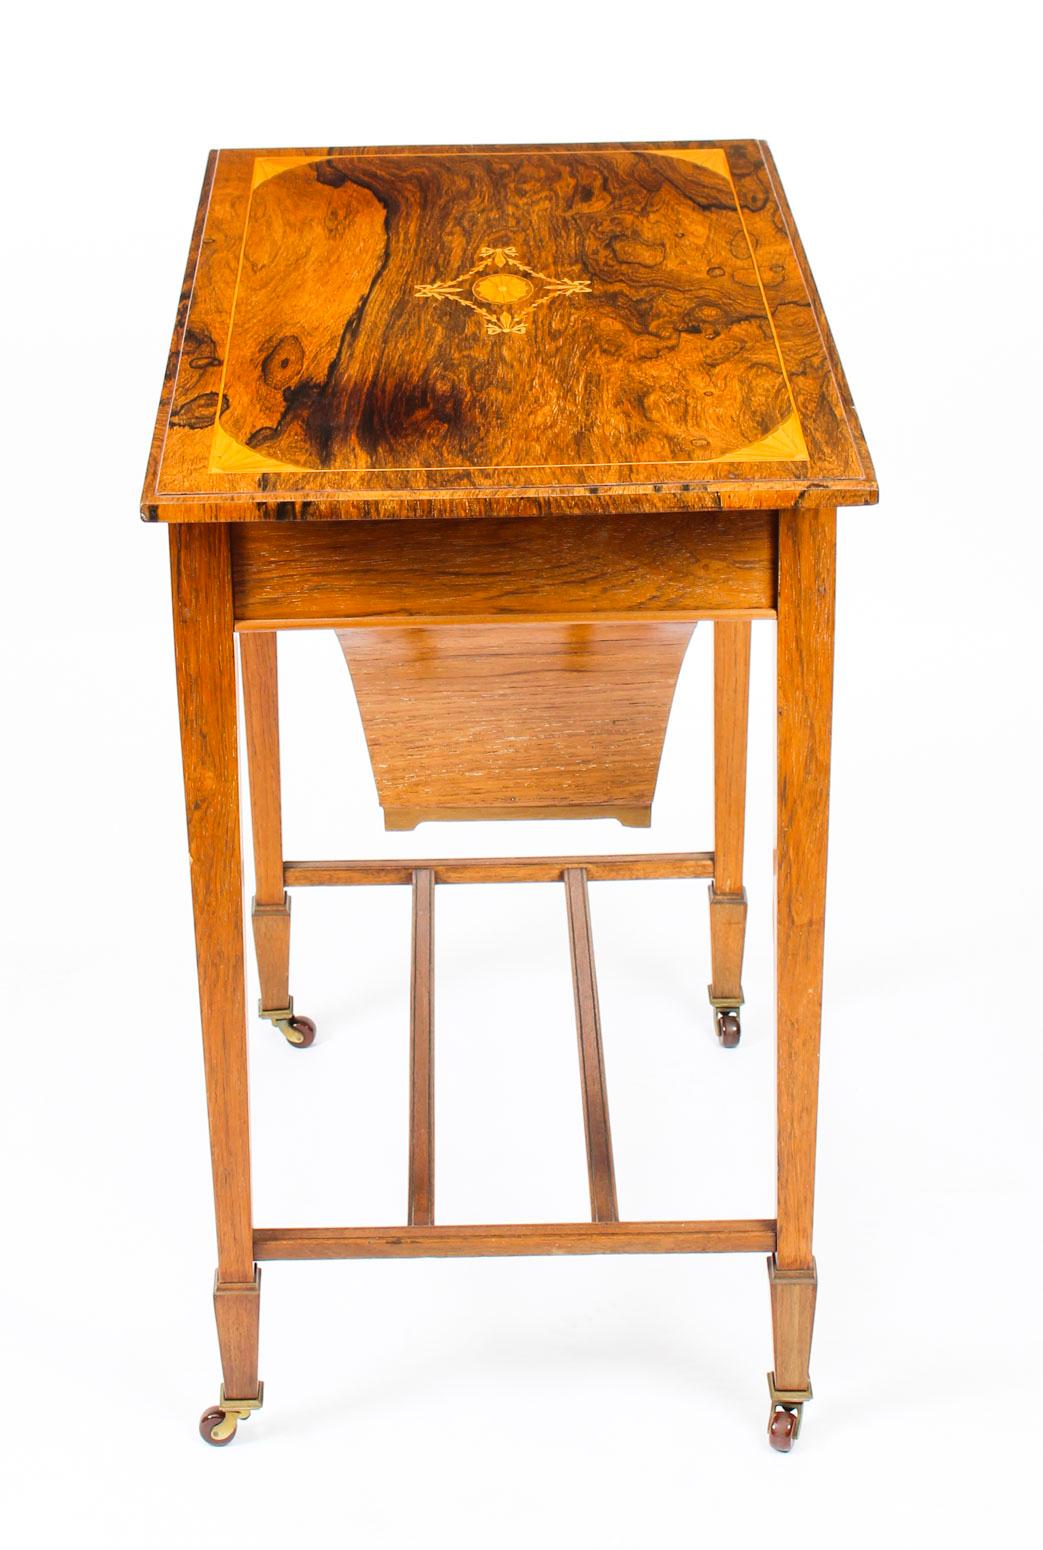 Antique Edwardian Inlaid Workbox Side Occasional Table, 19th Century For Sale 4